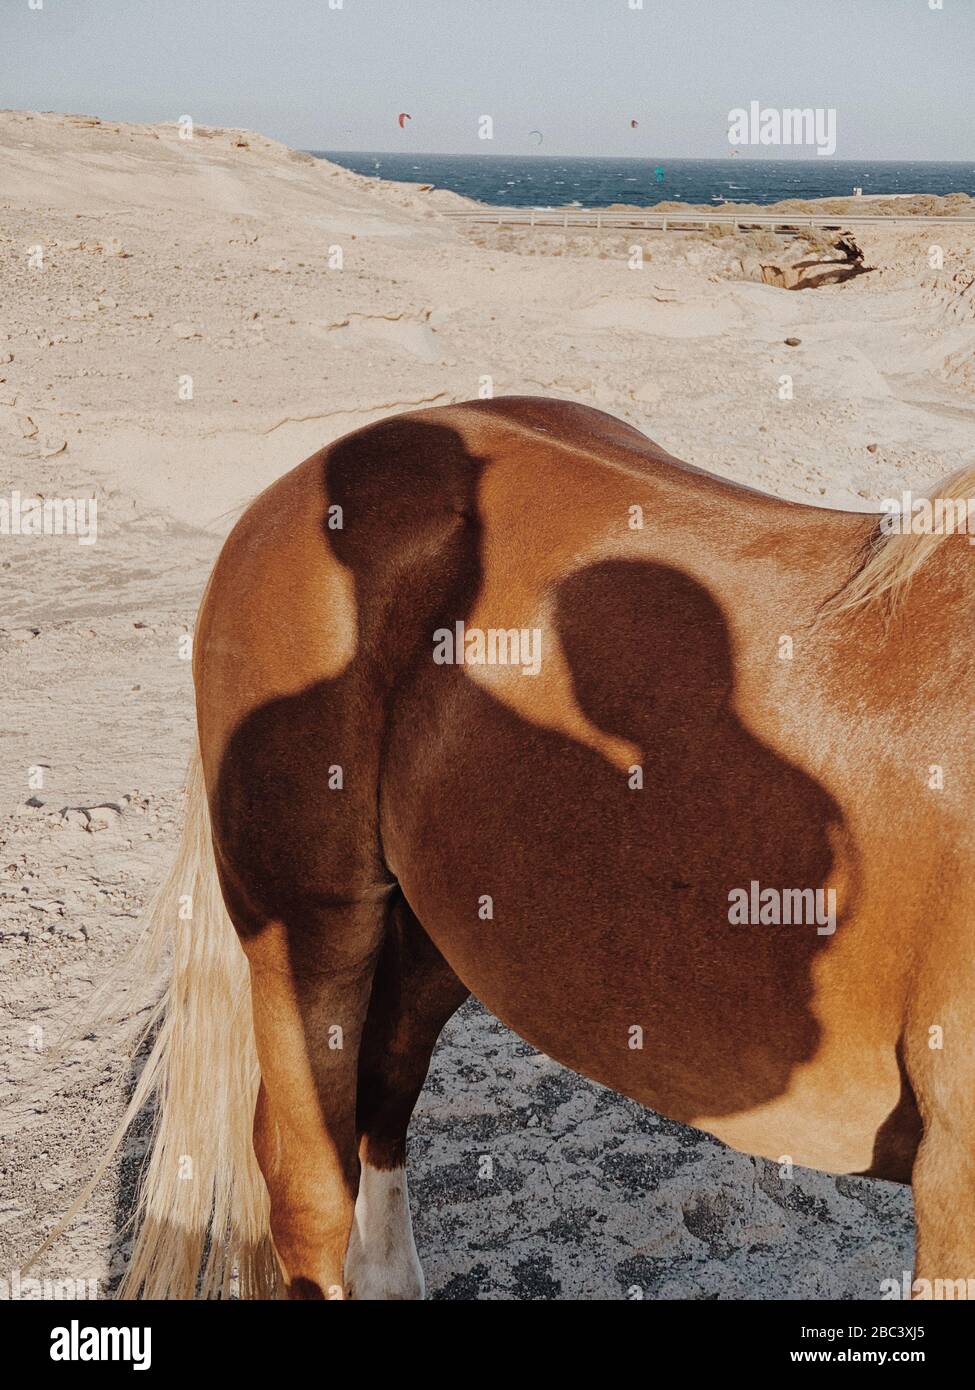 Close up of man and child shadow projected on horse skin Stock Photo